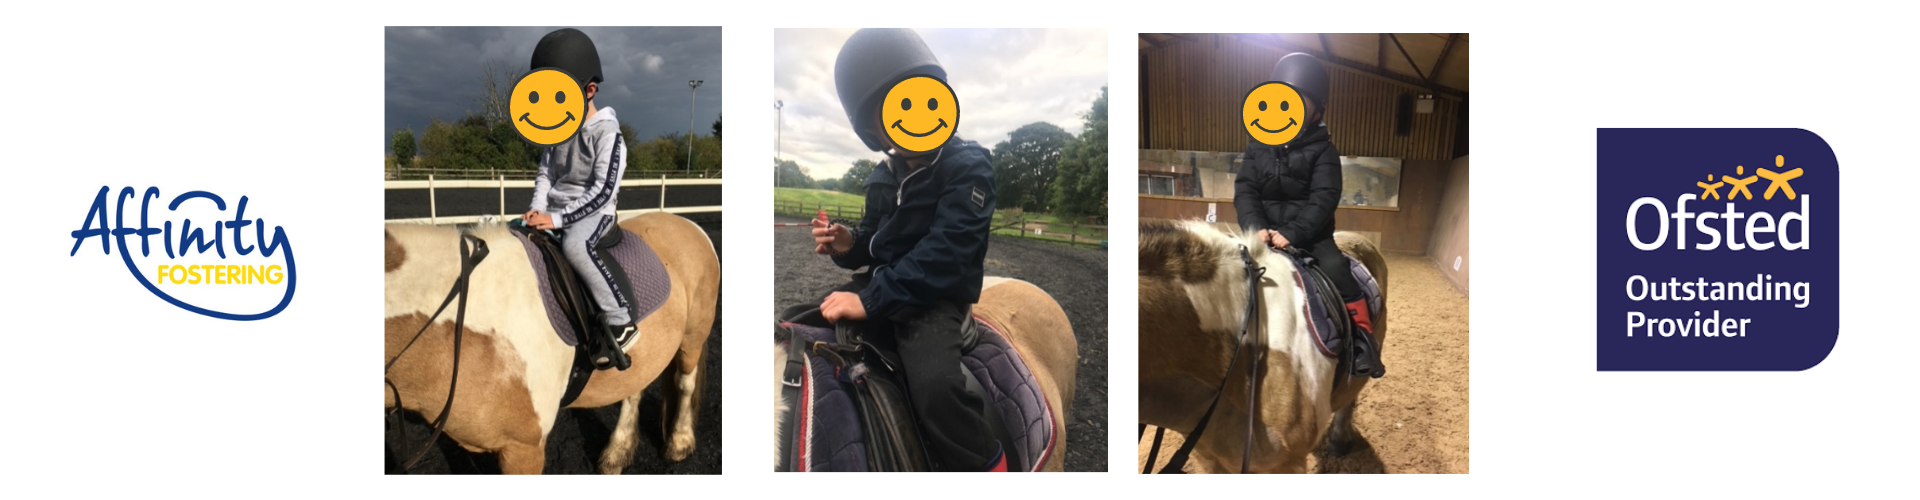 horse riding support session